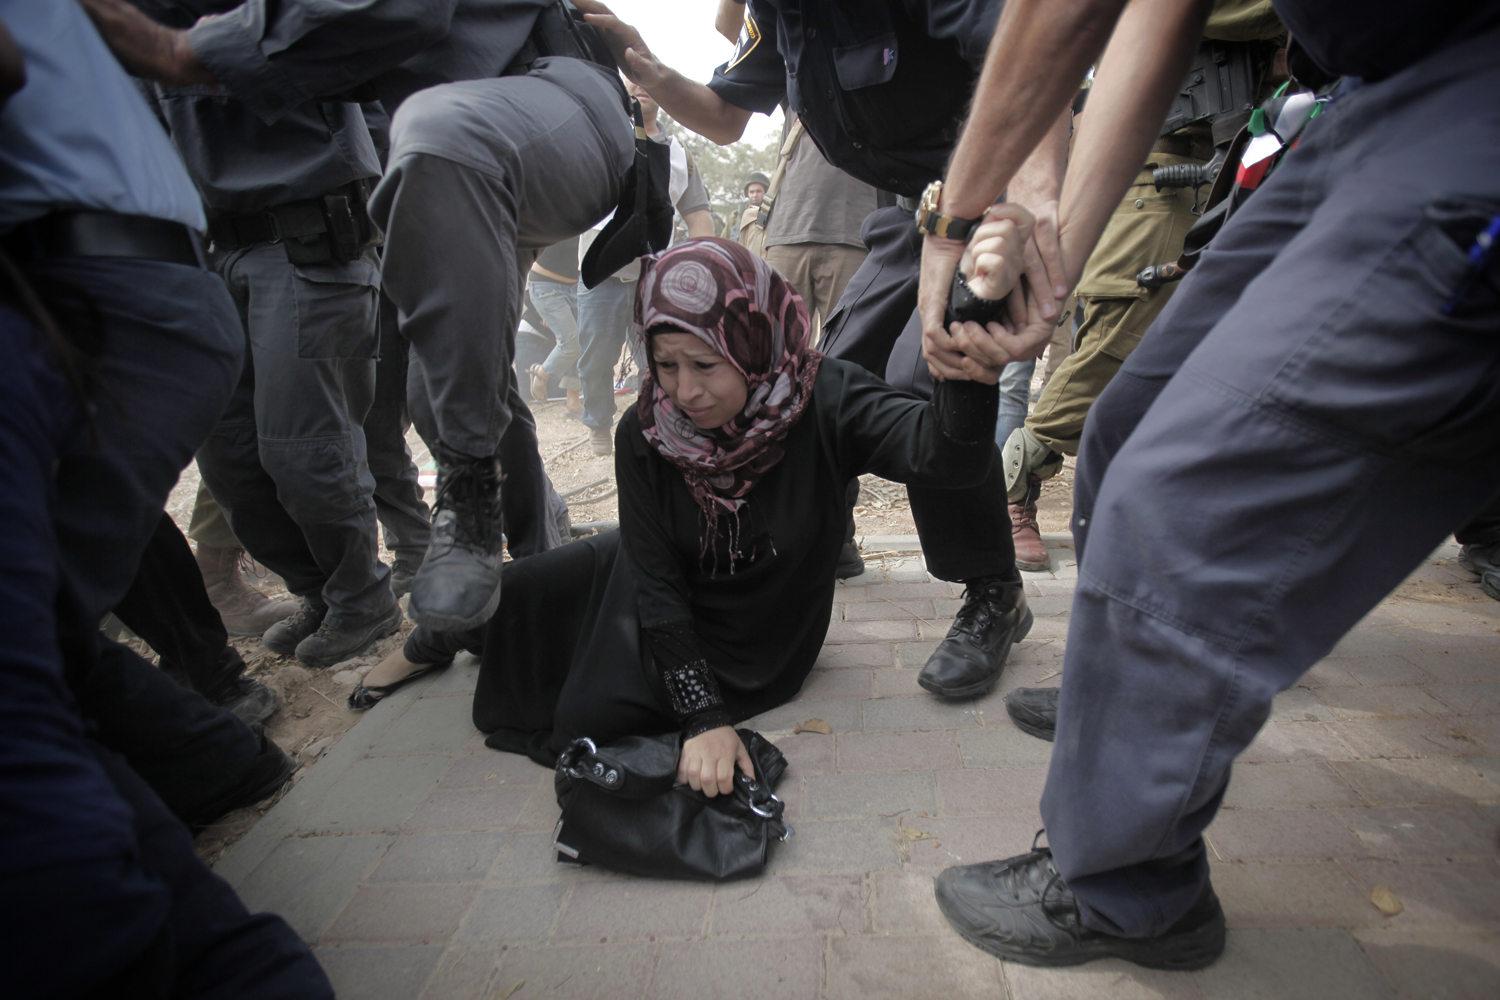 Image: Oct. 24, 2012. A Palestinian activist is arrested by Israeli soldiers as dozens of Palestinians block the entrance of the Rami Levy supermarket opened in the Shaar Binyamin Jewish settlement close to the city of Ramallah in the Israeli occupied Palestinian West Bank.